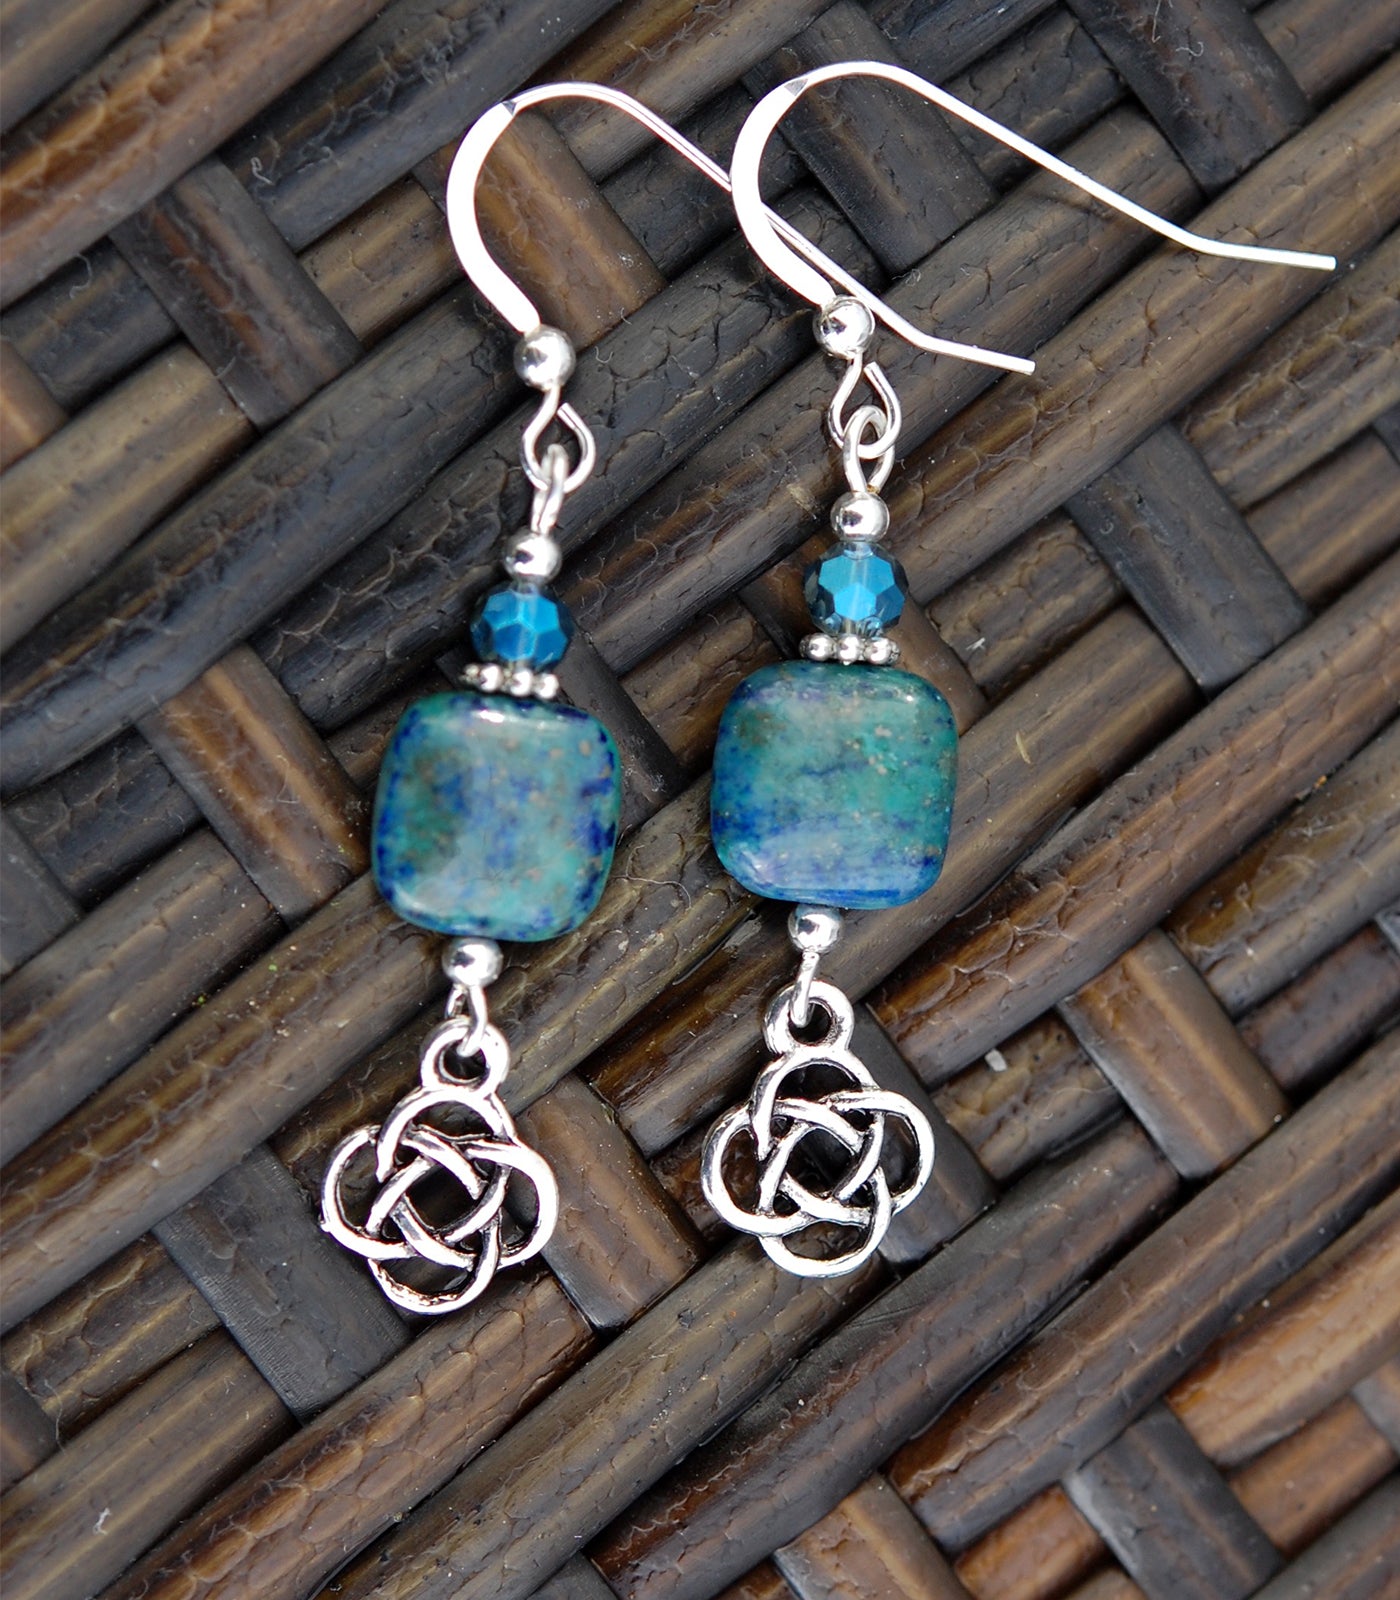 Square Azurite with Celtic Knot Earrings